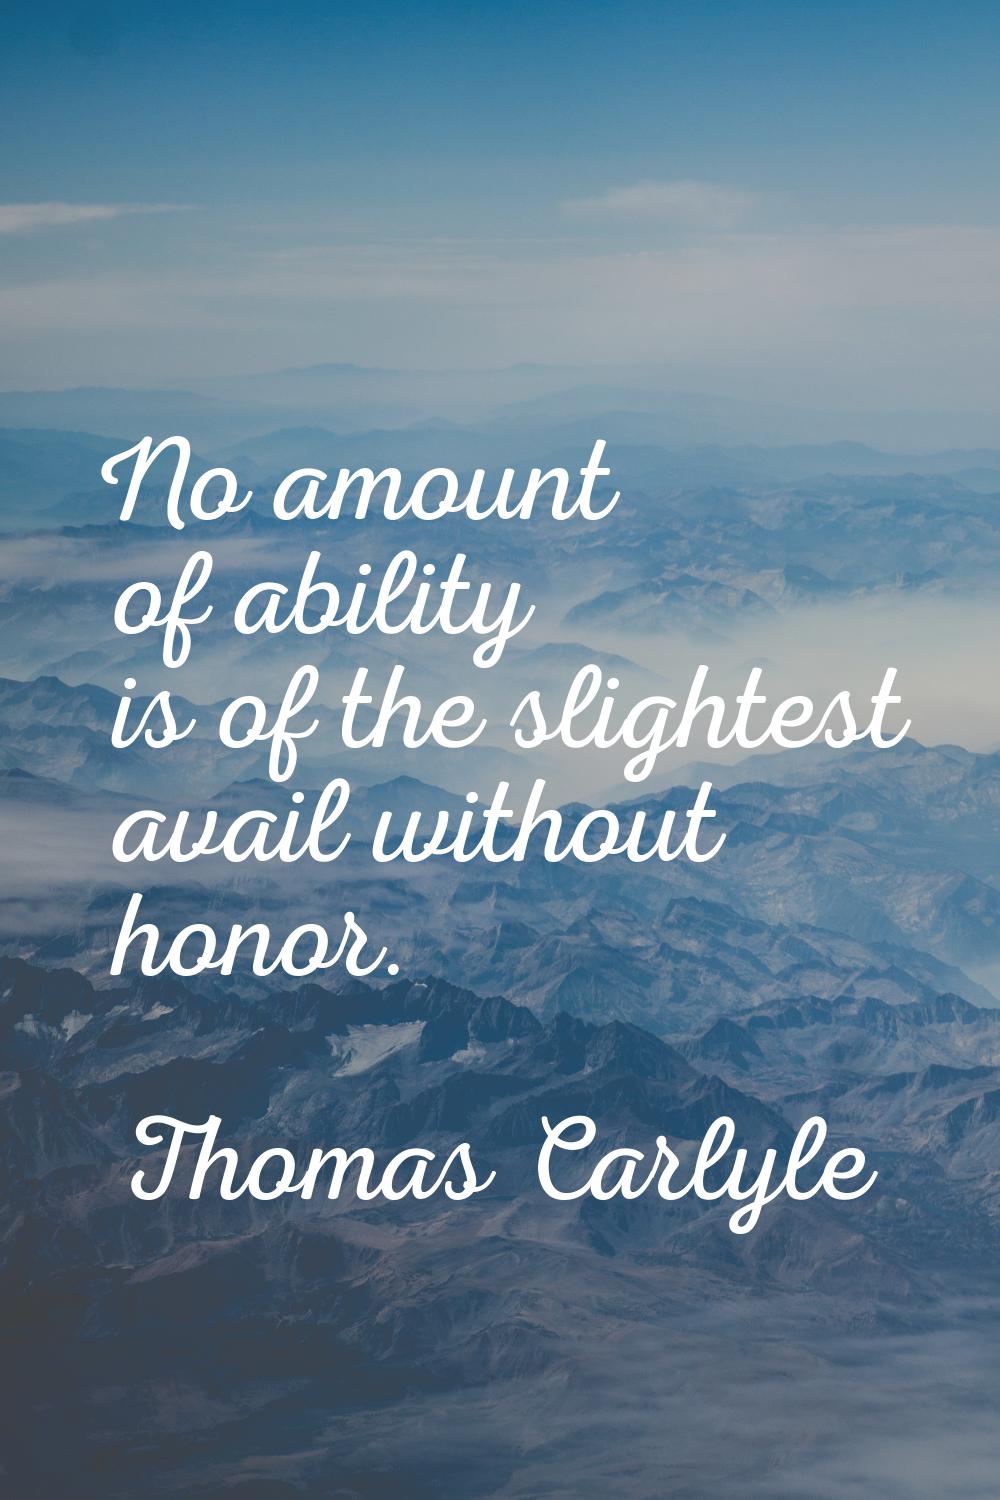 No amount of ability is of the slightest avail without honor.